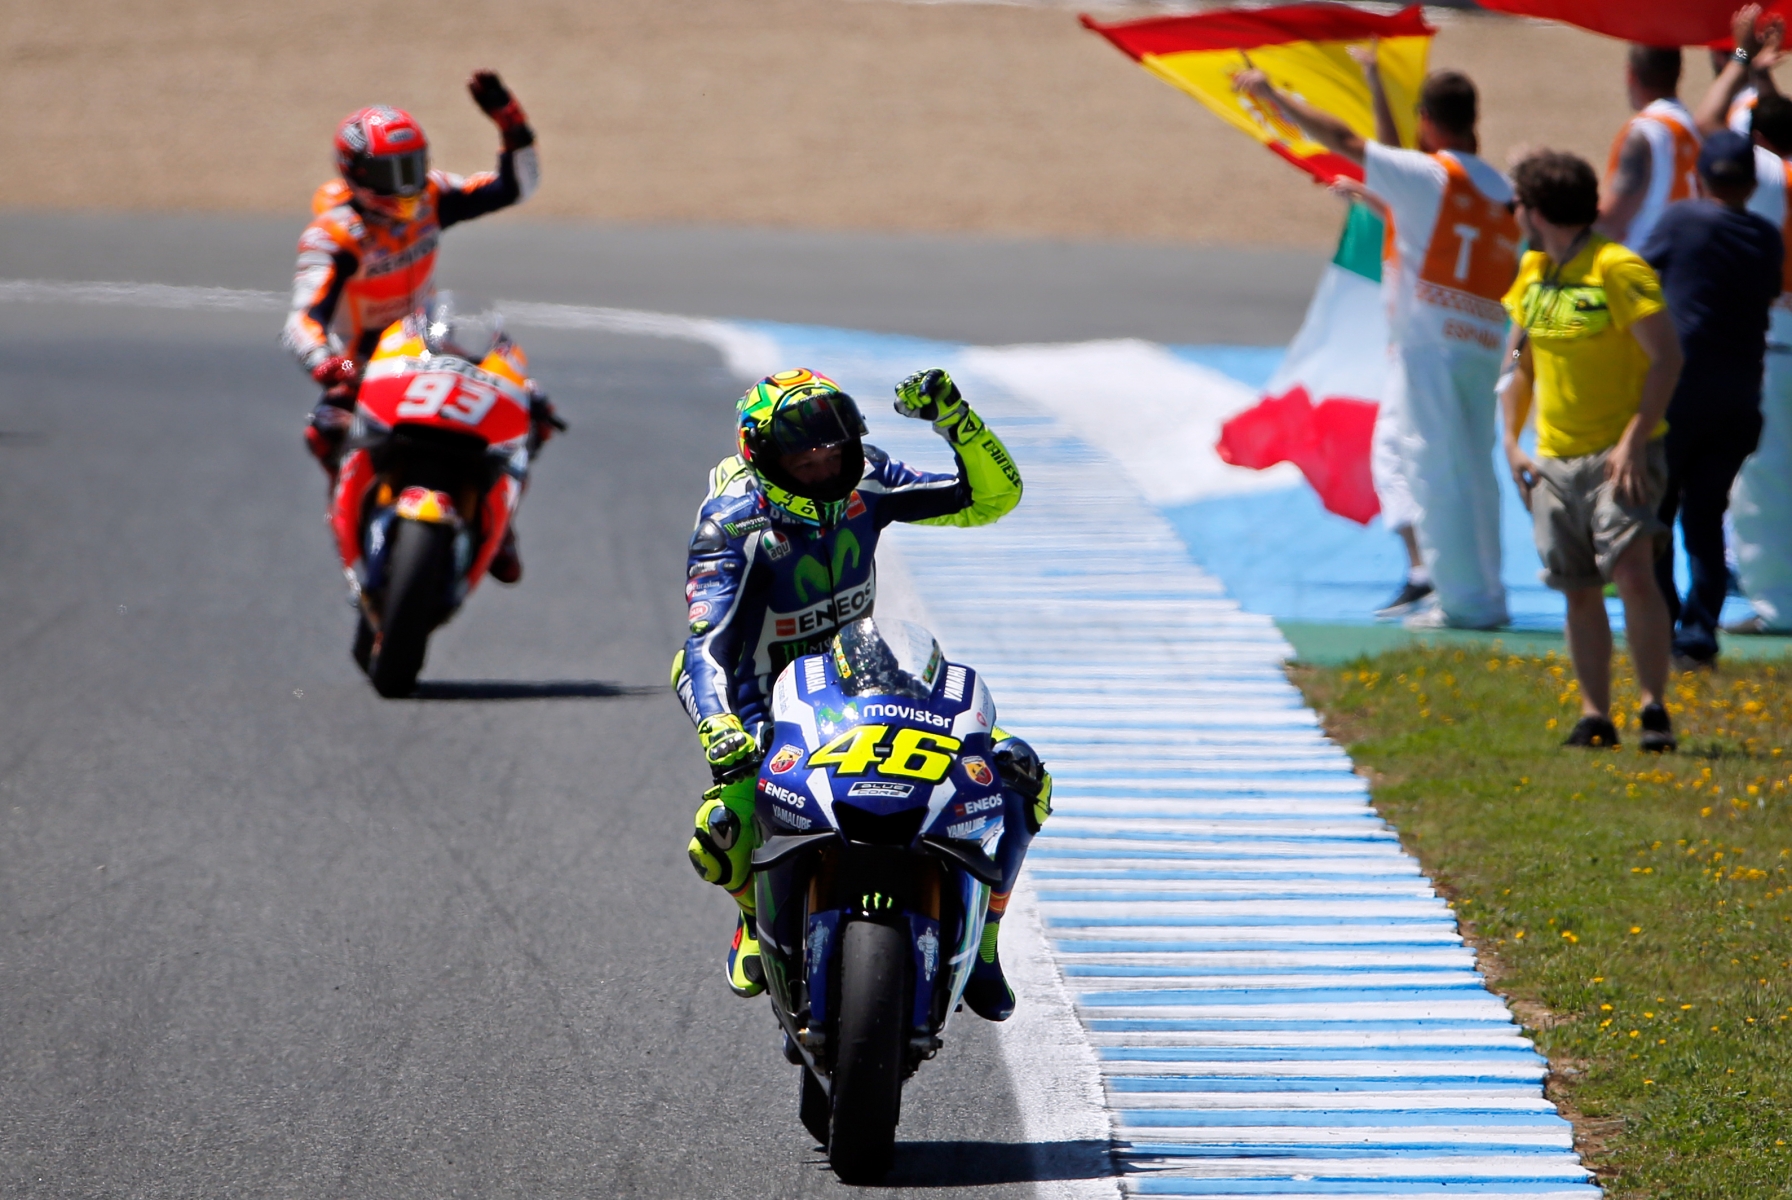 Moto GP rider Valentino Rossi of Italy celebrates after winning the MotoGP race of Spain's Motorcycle Grand Prix at the Jerez race track in Jerez de la Frontera, southern Spain, Sunday, April 24, 2016. At left is championship leader Marc Marquez of Spain who finished third. (AP Photo/Miguel Angel Morenatti)